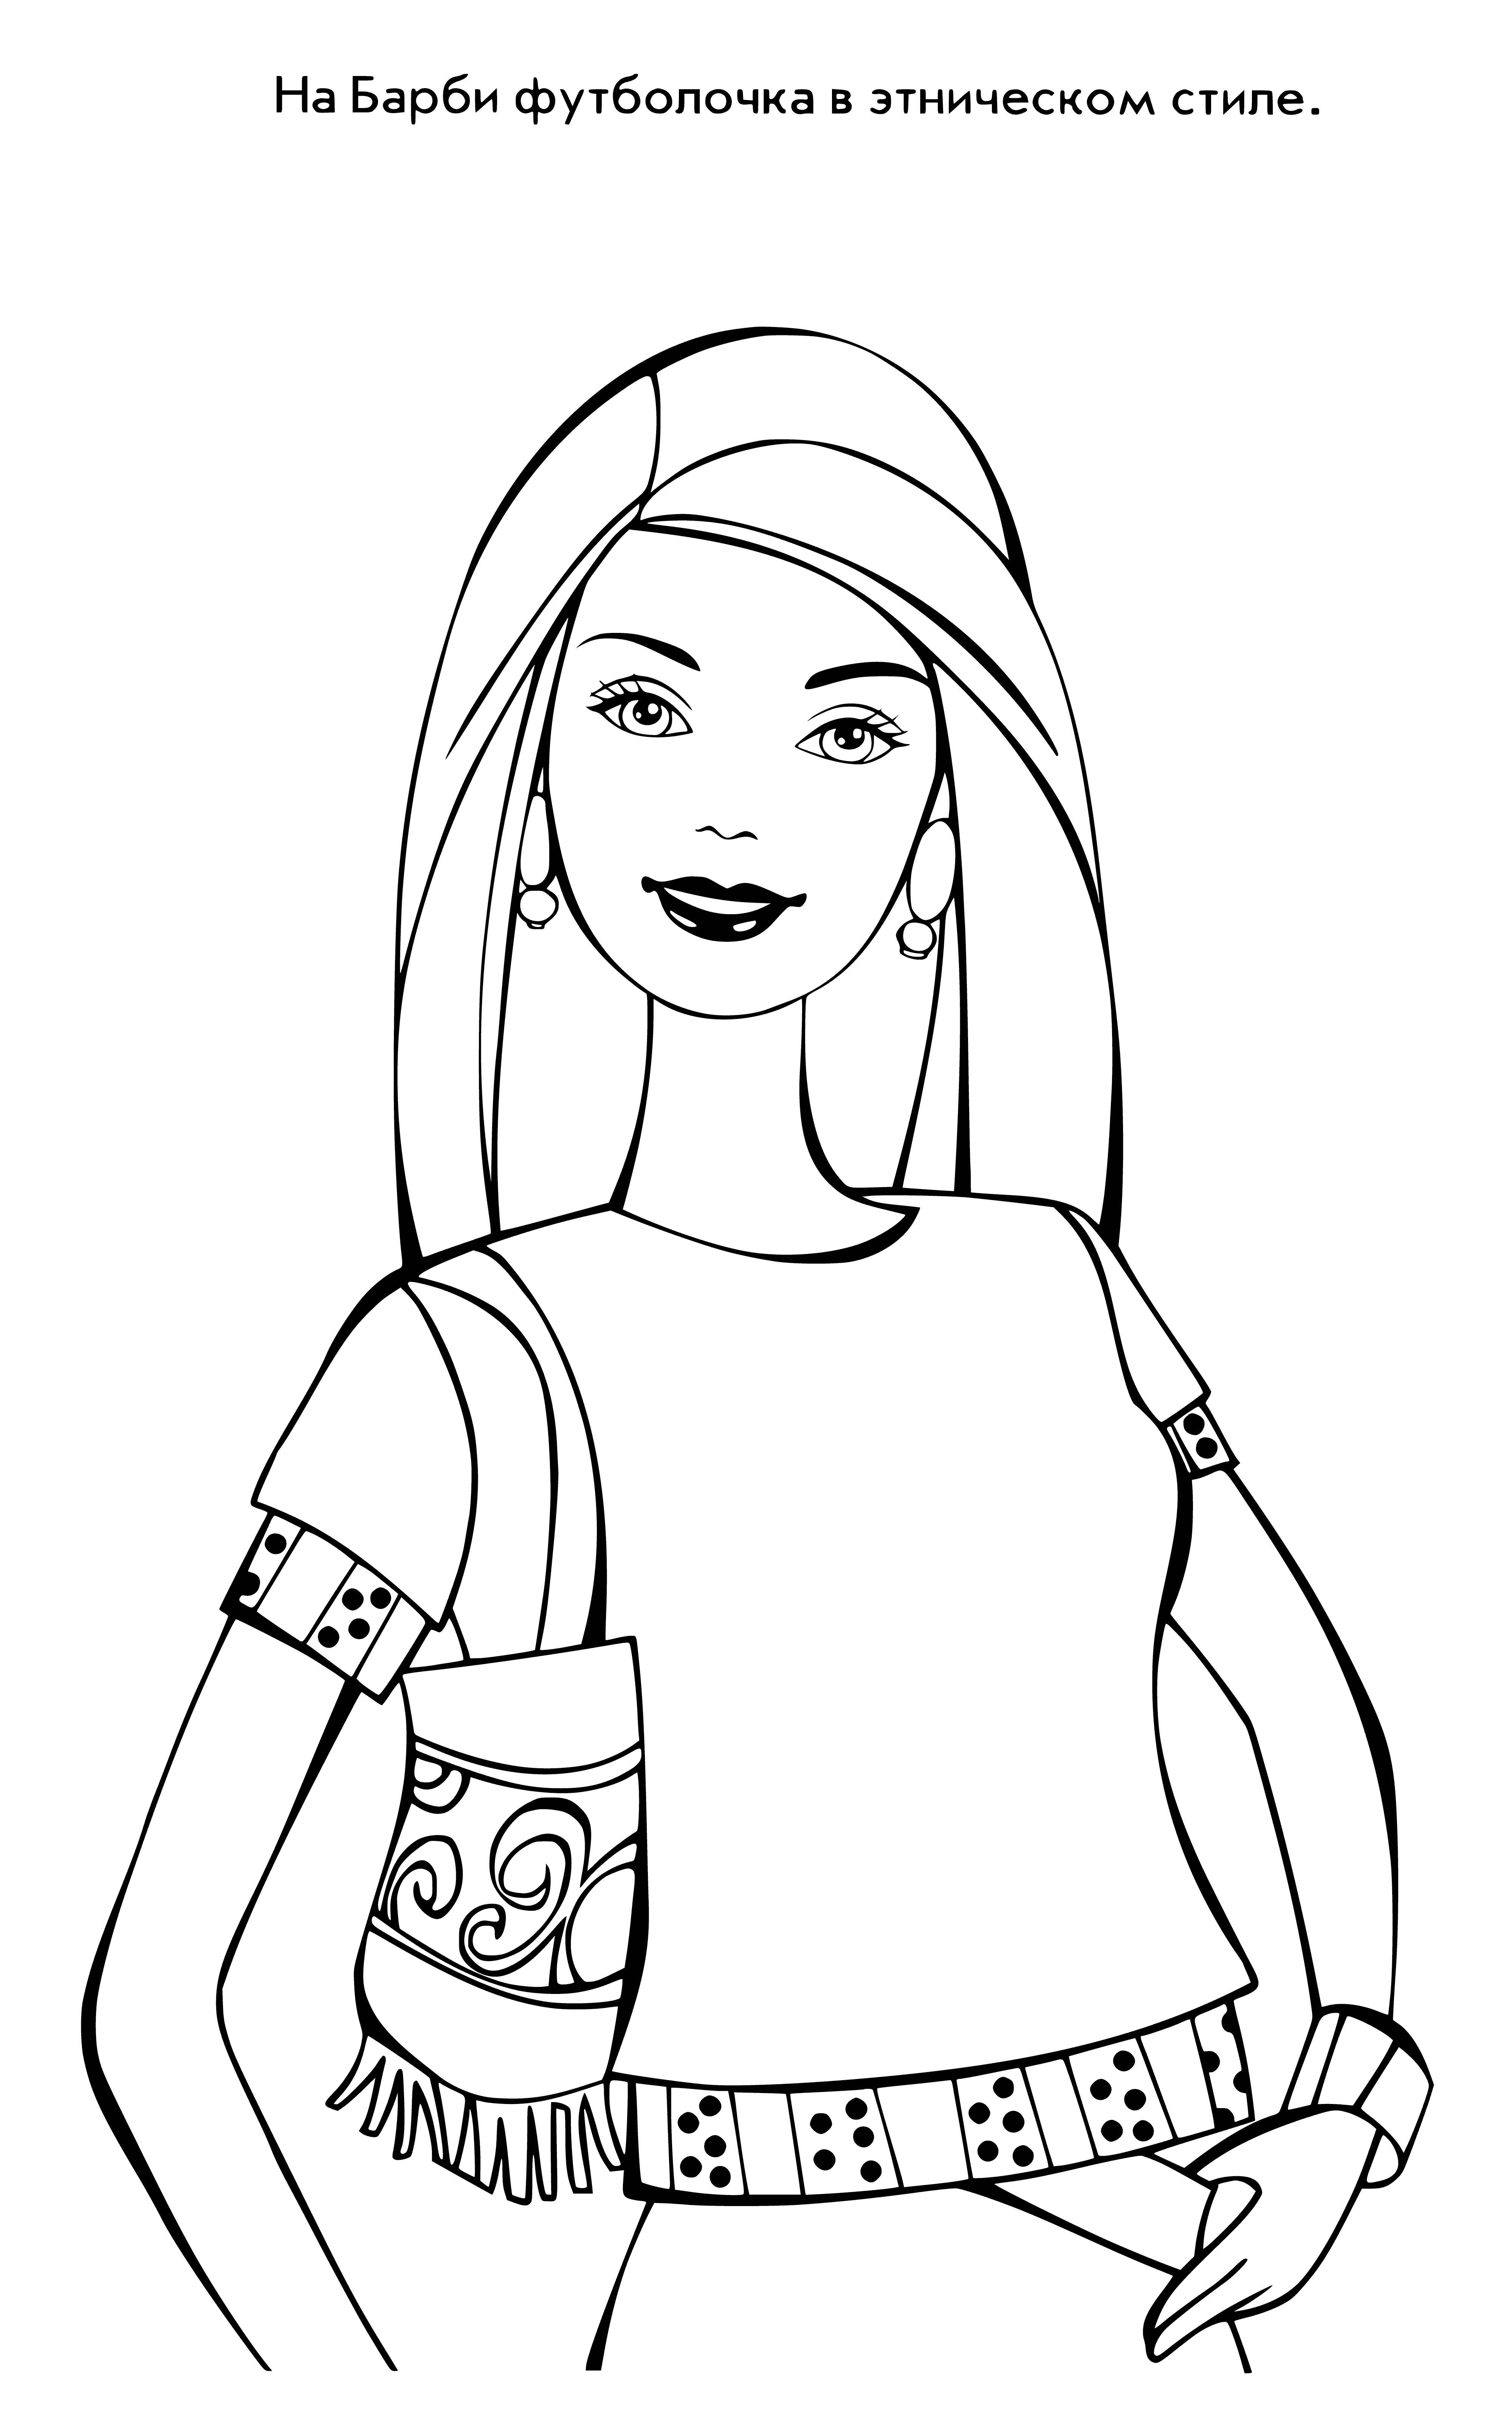 coloring page: Barbie wearing pink dress, black belt/shoes, blonde ponytail, and pink earrings.